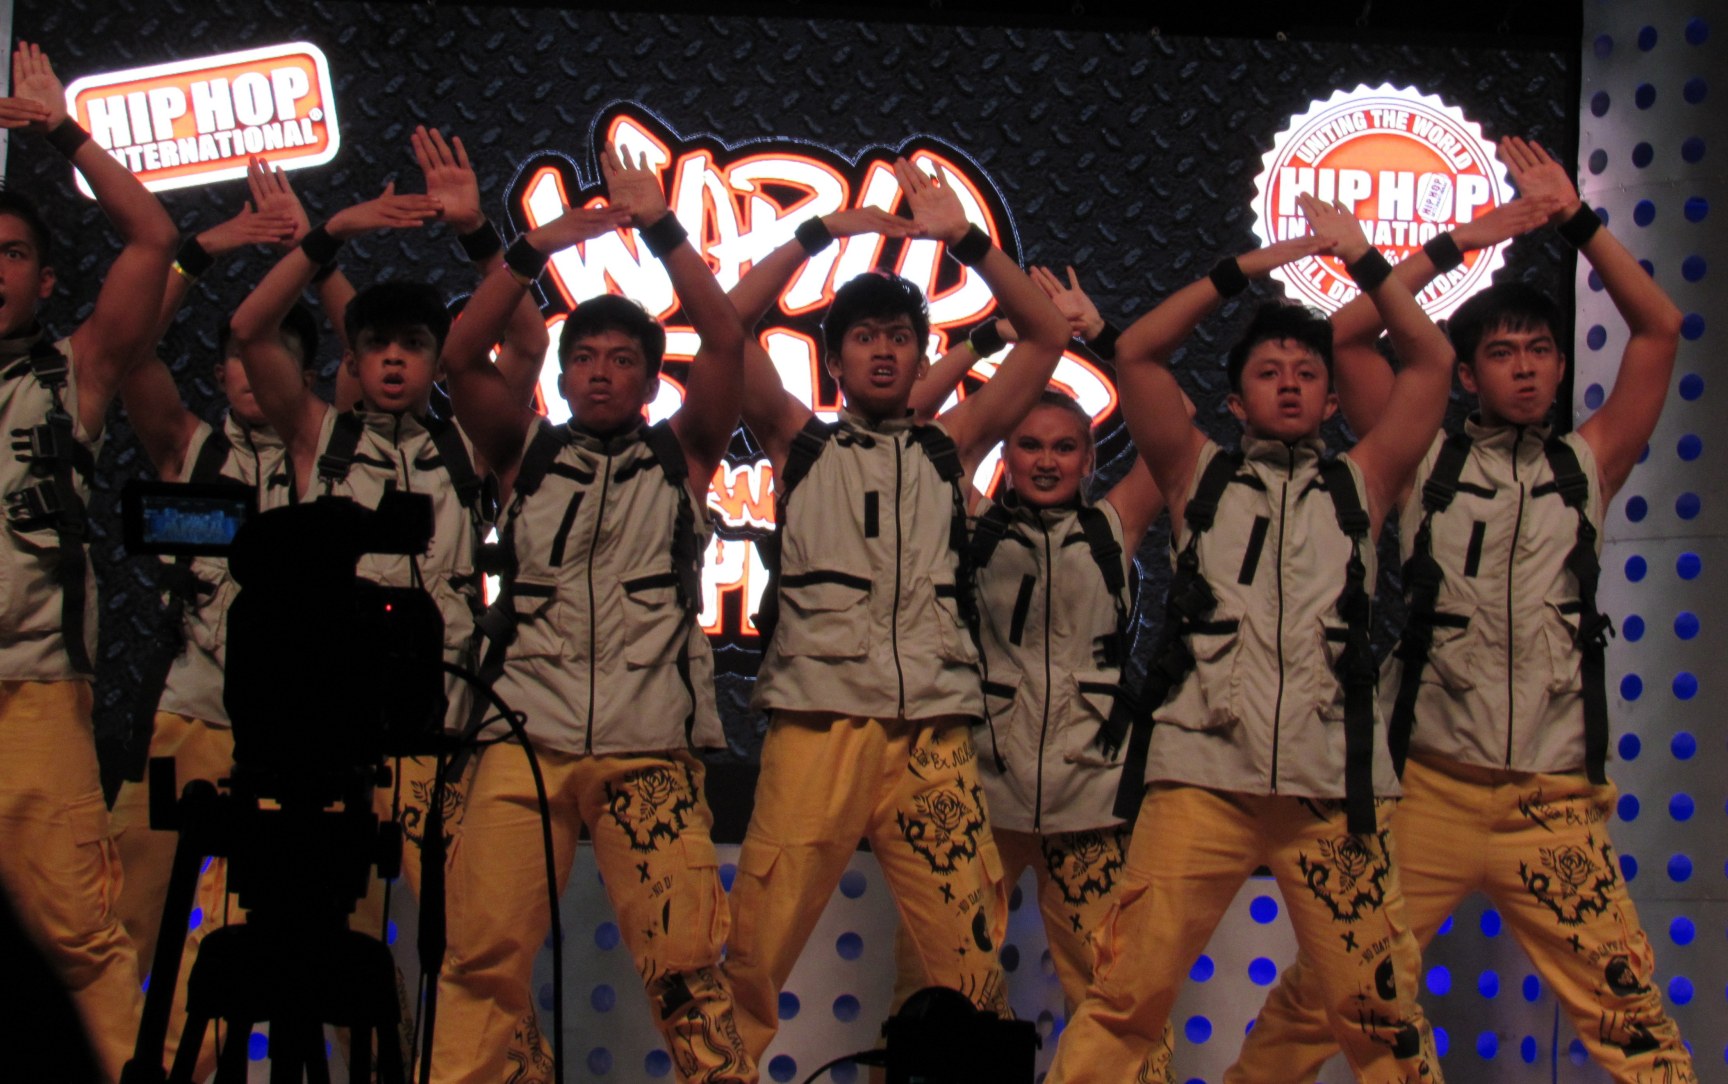 HHI: CREWS FROM FIVE DIFFERENT COUNTRIES WIN GOLD AT WORLD HIP HOP DANCE CHAMPIONSHIPS